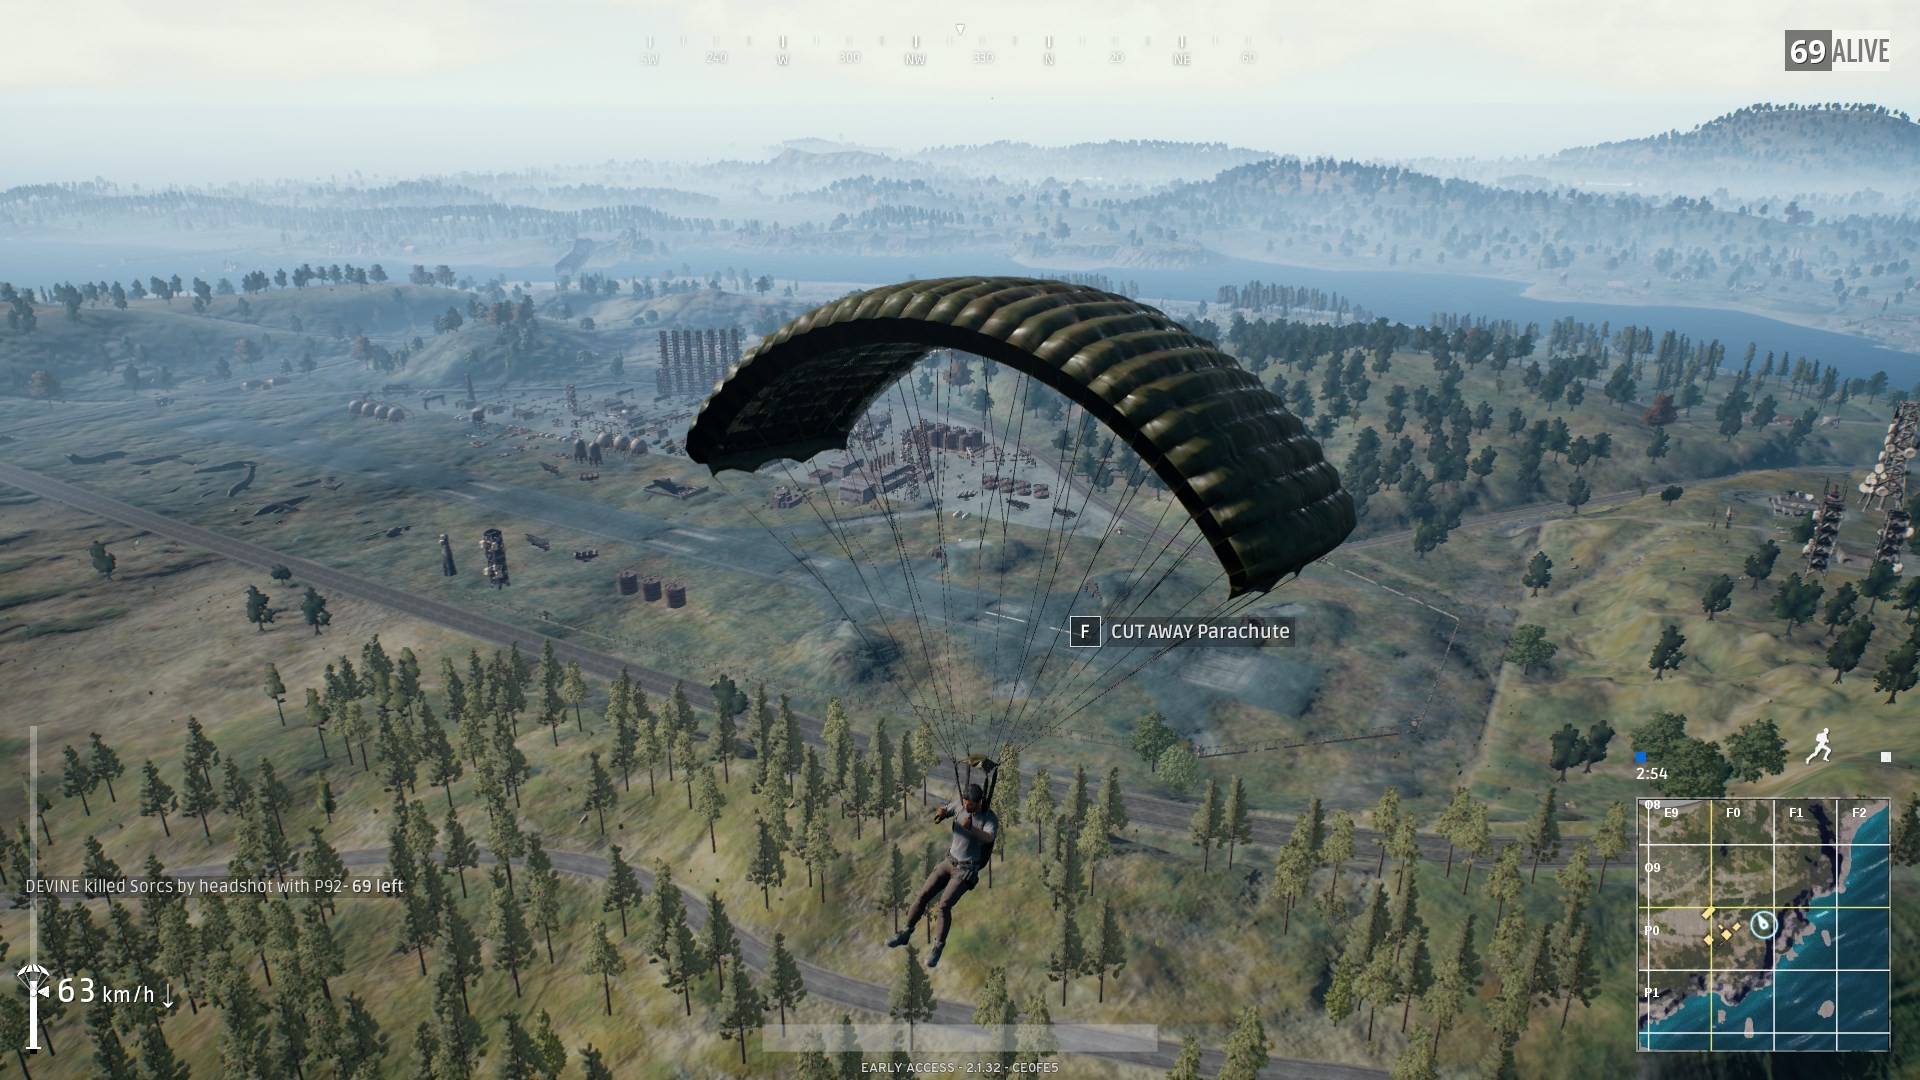 PUBG is not only a game but it's a fever for the players who keep on exploring its different tricks to make a win. In the gaming world over the years, it is the first time that any game has directly made it to the top of the list for players. The unique feature of playing it on smart phones with live interaction feature stay in touch with other players has graded PUBG as super interesting game. So, to make PUBG more adventurous, here we have top tips and tricks to win the game.  Top PUBG Tips and Tricks to Win the Game Here we have the most interesting yet best to work PUBG tips and tricks to win the game like a genius. Follow these steps and get the chicken dinner: Parachute Right You must keep it in mind that the first couple of seconds of the game are really important. At this phase, the land gives you a huge leg up. If you’re a beginner player of PUBG, it is highly suggested to stay away from high traffic areas. The part with tall standing buildings isn’t a good option for landing. It is better to go a bit farther and land in a smaller territory. You don’t need to worry as here you will still find the essential loot and guns and it will be easier to ward off other players. Begin with places like Gatka and Mylta. No Haste, Avoid First Contact As soon as you land, one of the first mistakes you can make is to engage in combat at the early stage. If you’ve just landed and you hear someone else in the area, turn away and go towards another direction. This is so because the chances of the ones already on the land carrying a weapon are much higher. So, be smart and play sensibly. Keep an Eagle Eye on Other Players It is something most important to play efficiently that you keep an eye on other players and their activities. Specifically, when you’re exploring a new area, keep a focus on the signs of activity. If you come to a building with doors open and the ammo is gone you must know that someone has probably been there. They could be gone by now but you should proceed slowly at this stage. Similarly, you should close the doors when you’re hiding out in a building, or after you’ve looted. This gives you an advantage and makes surprise kills easier. Use Shotgun at the Right Time We know that haste makes waste but at the same time, it is important to know about the right time to use shotgun. At first glance, the shotgun might not seem like the best weapon. But for most close-range combat, especially in the beginning, it really is. In the beginning you’re mostly raiding areas and chasing other players, this is where the shotgun shines. Keep Changing the Armor While playing PUBG, the armor wears down in the game as you engage in combat. So, it’s best to keep switching it when the armor exhausts. Go with changing your armor even you have to switch from higher-level armor to a lower level one. It will increase the protection you will be getting. Stick to the Weapon of Your Choice Play smart and in such a way that you stay focused to the win. When you will play with the mission to get the chicken dinner, you will need dependable tools. If you are a beginner, it might be taking 2 game plays for you to analyze which weapon is the best. In every game, try to find that gun and then stick to it.  Zigzag is the Best Moment in Combat When you are engaged in a combat in PUBG, it’s important for you not to run in a straight line. Specifically, when you’re under fire, make your move in zigzag manner. Straight line run is a sure-shot way of being killed. Instead, run in a zigzag or haphazard pattern. It will take longer to get to cover but the chances of you being dead are much lower. Don't Lie Down When Getting Snipped Note that when someone is sniping at you from a distance, your first predisposition is to lie down on the ground. But know that this is a mistake. It will make it easy for the sniper to identify you and they have a good vantage point. If you lie down, all they have to do is lower their aim and shoot. You’re dead. So, here again the tip of running zigzag way and dropping off the weapons would be best to go with. Be smart, stay alive. Be Conscious of the Red Zone The time when you’re playing in a squad, there’s always one guy who keeps exploring right without noticing the time. Don’t be that way and stay in action to play smart and get to the win. The end part of the game is to be played with better attention. Be mindful of the red zone and instead of running like crazy at the end, be in safe zone with plenty of time to spare. Make PUBG Adventure with Friends The best use of online gameplay of PUBG is to play it with your friends while making it an adventure. You can either play with a friend or with a group of friends. The best way to do is to sit together with three friends and play. It would not only make you and your buddies have a good time together but also increase the chances of your win. One player against 99 others is tough. But a squad of four, working together, helping and healing each other, increases your chances for the chicken dinner. Final Word By following these brief yet interesting PUBG tips and tricks, you can easily make it to achieve the win. Be it you all alone as game player or a team of buddies, following these tips can get you chicken dinner. Play smart, make the sure-shot win!